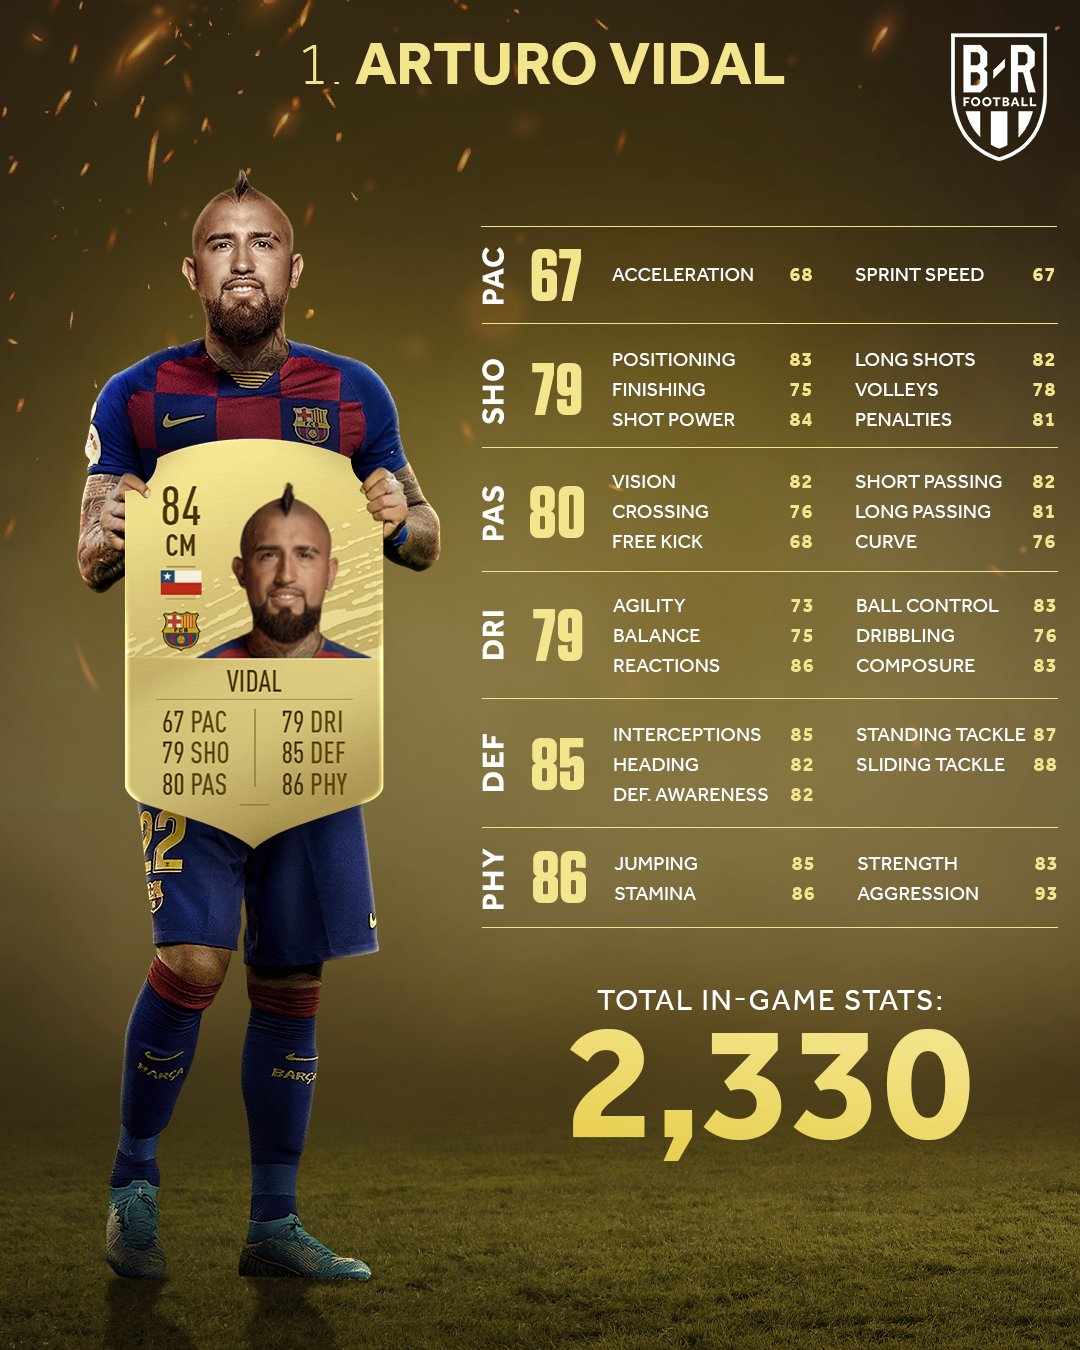 Happy birthday to Arturo Vidal, the man with the best total stats on  